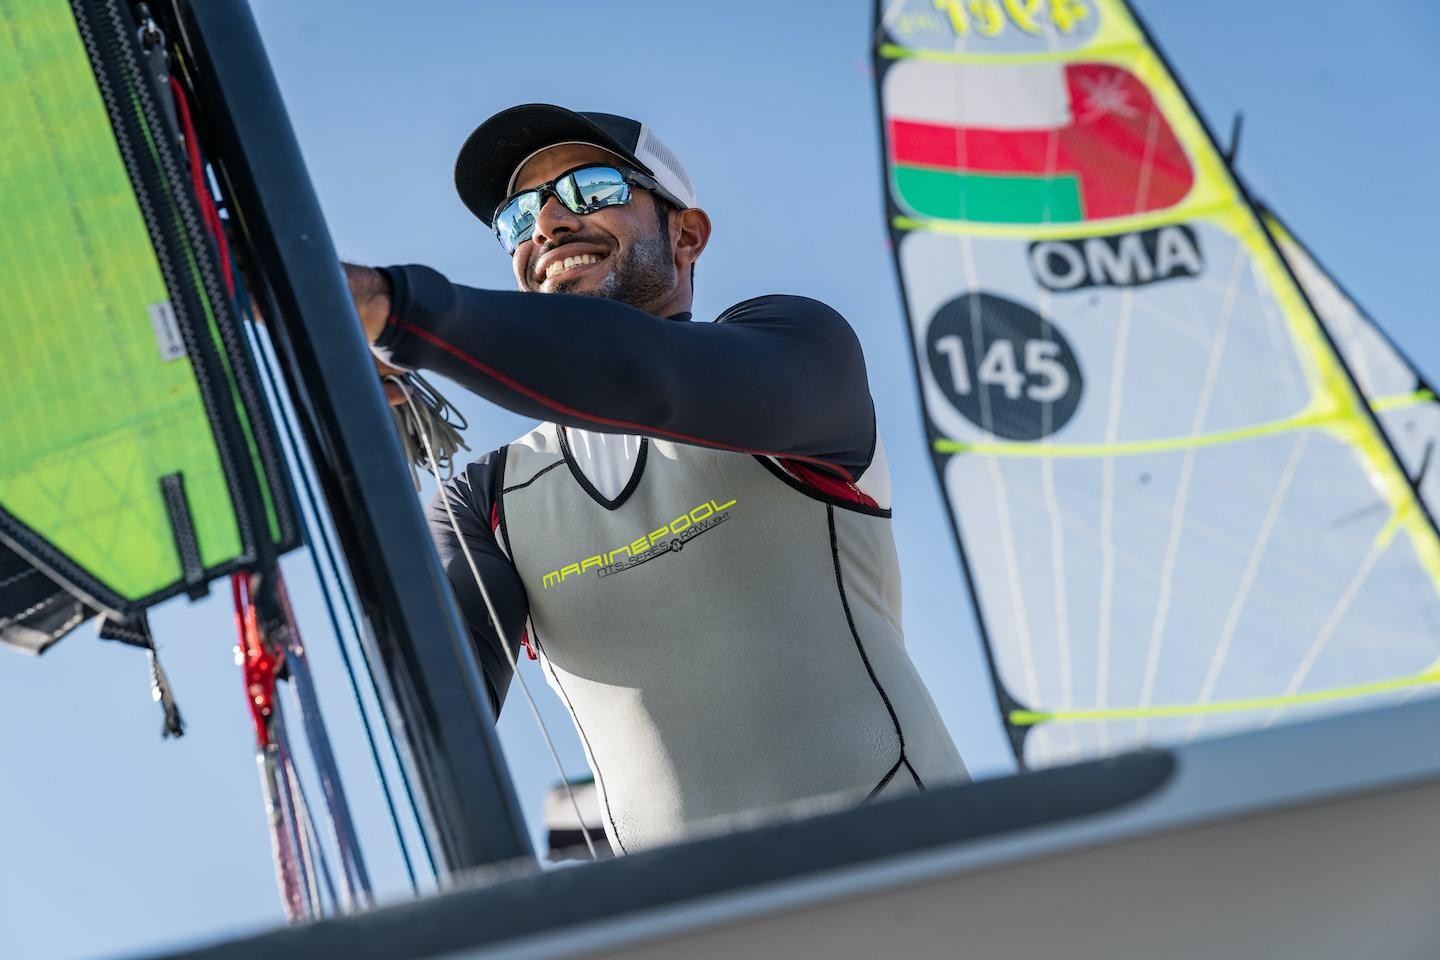 Mission accomplished for Oman sailors during the Olympics Games